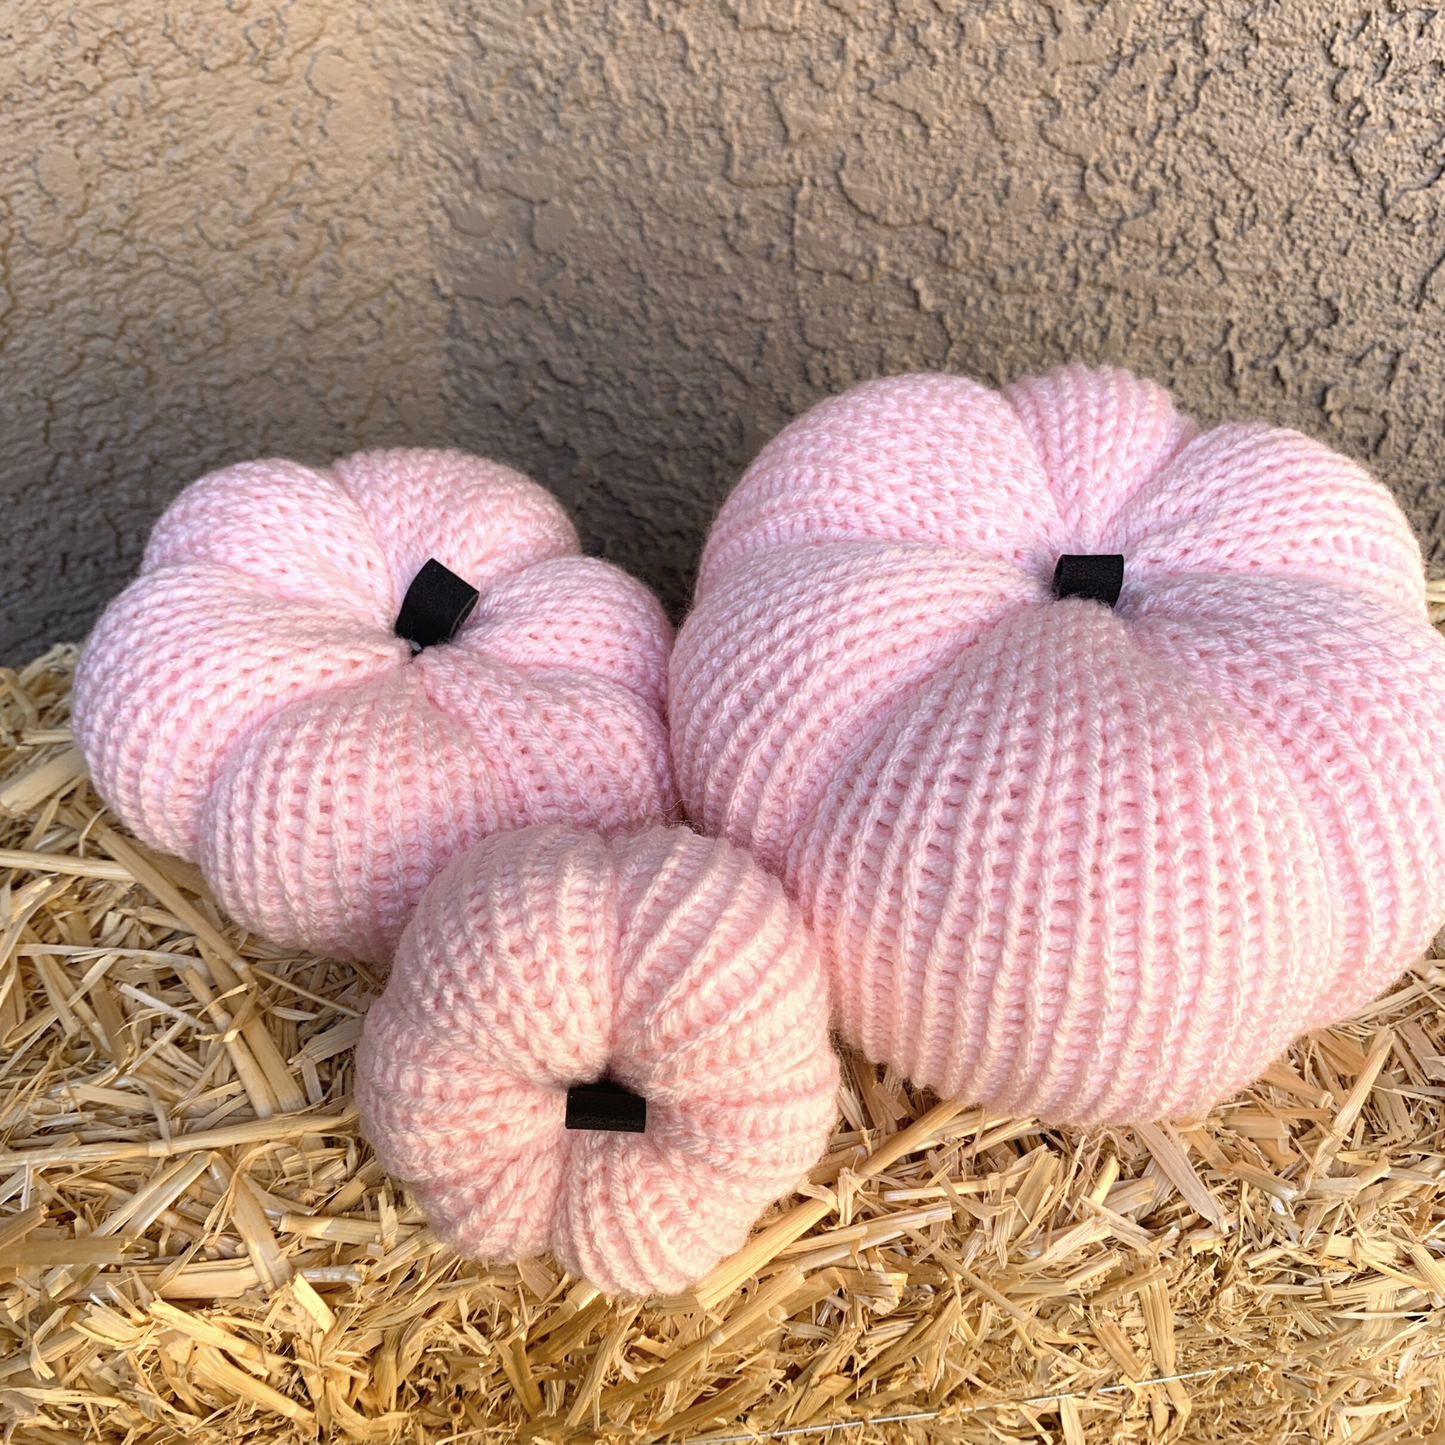 Pink Fall Pumpkins / Autumn Tiered Tray Decor / Rustic Farmhouse Decorations / Breast Cancer Awareness decorations